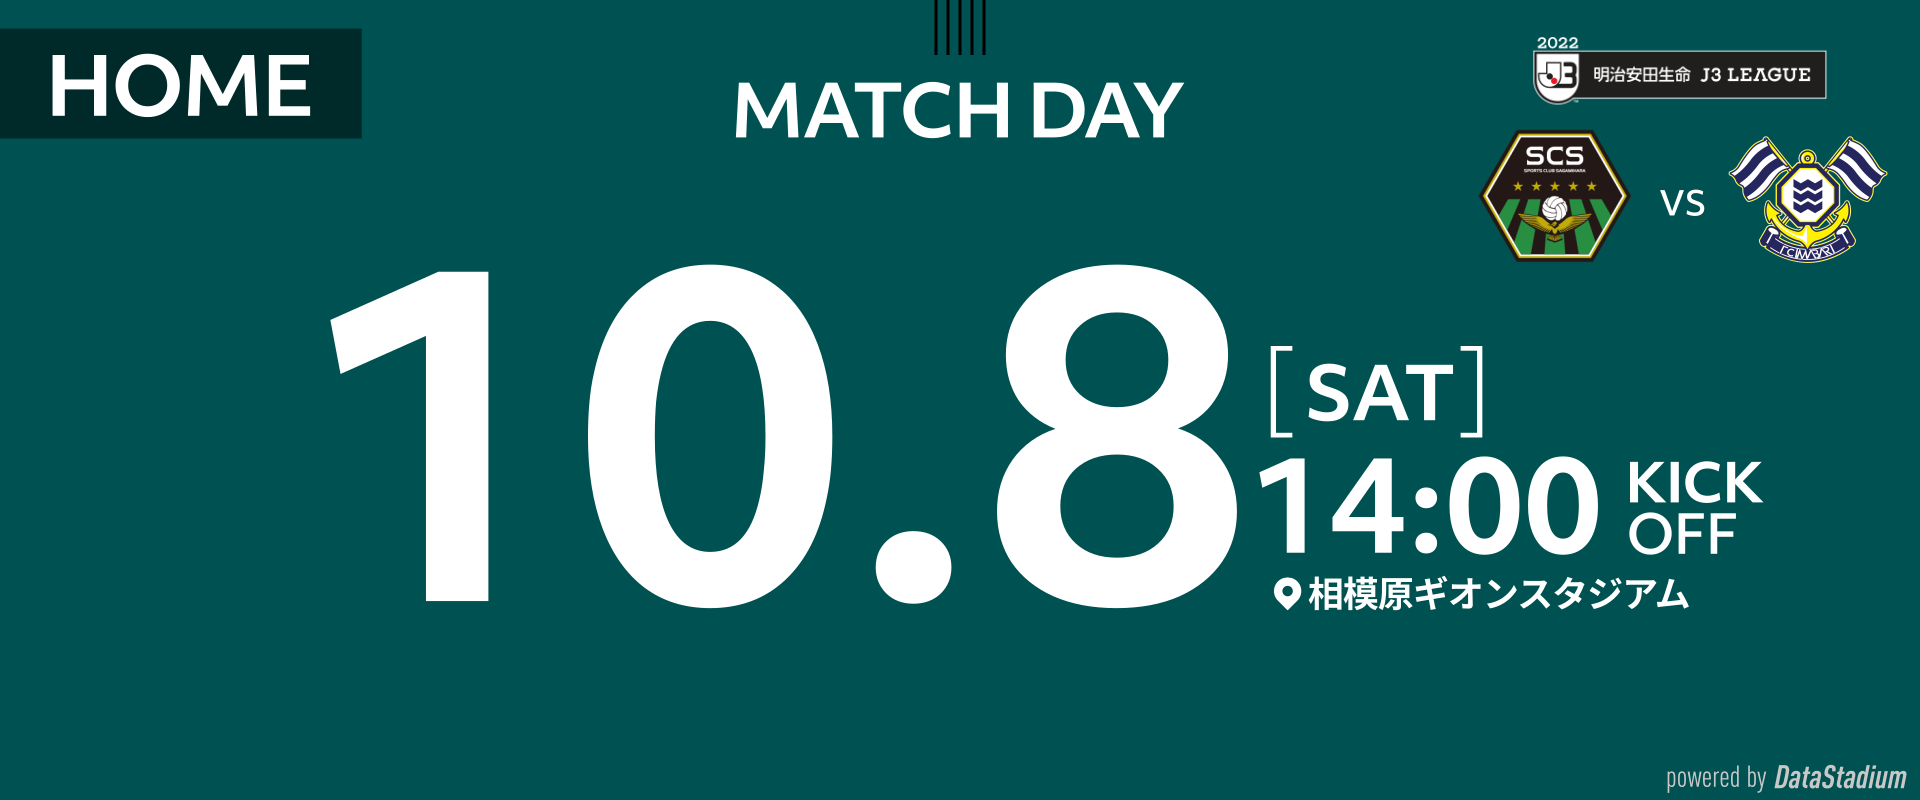 1008_matchday_1920_800.png